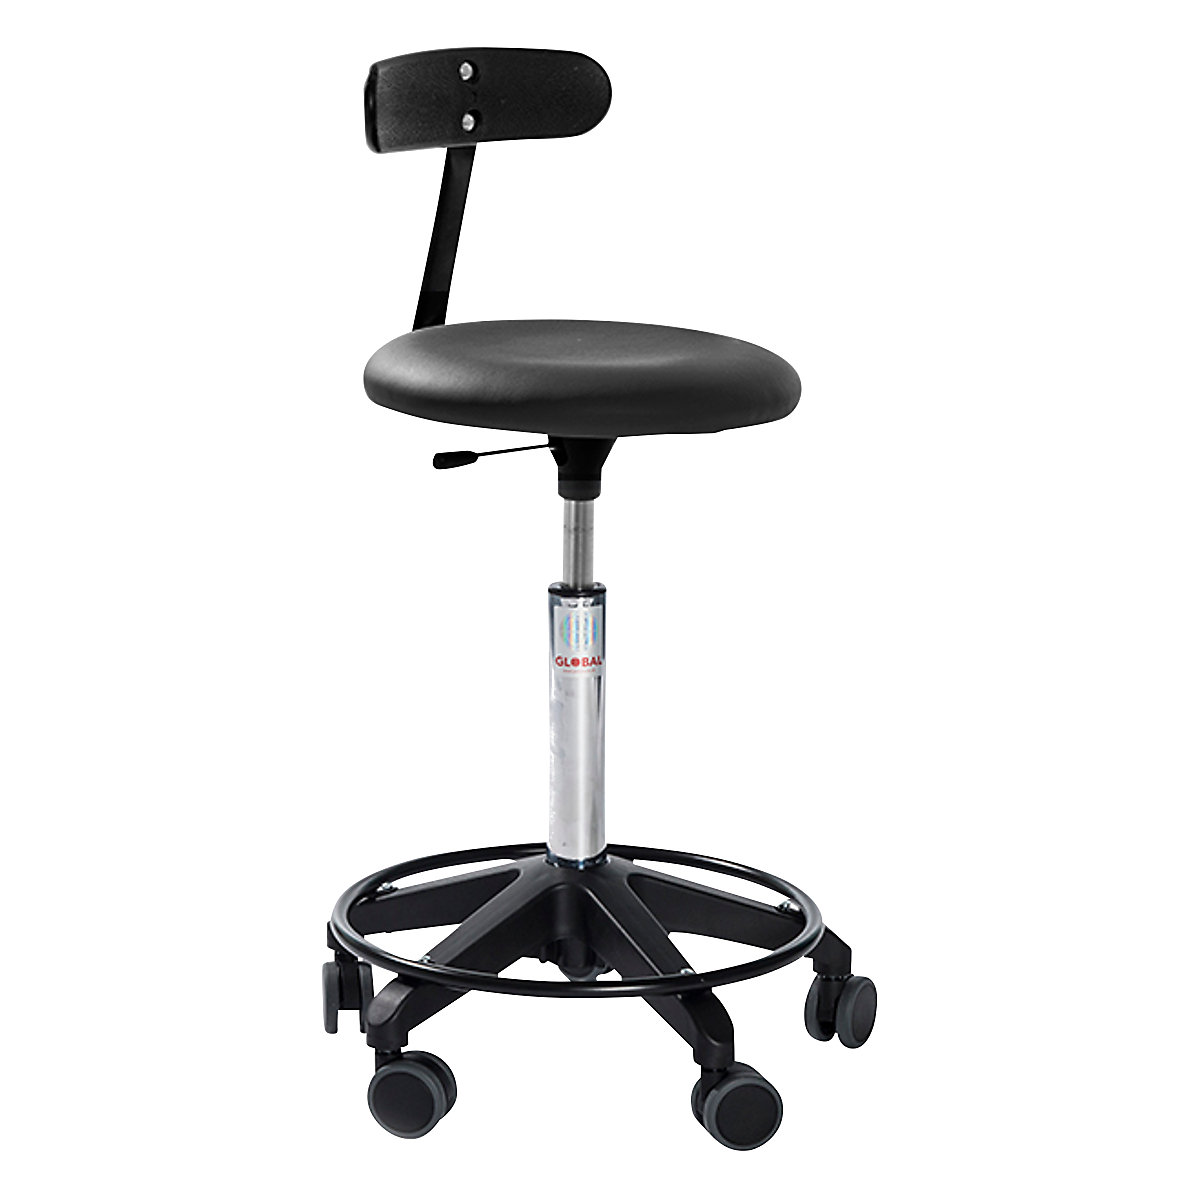 Industrial stool, height adjustable, with castors and back rest, black, height 450 – 580 mm-5